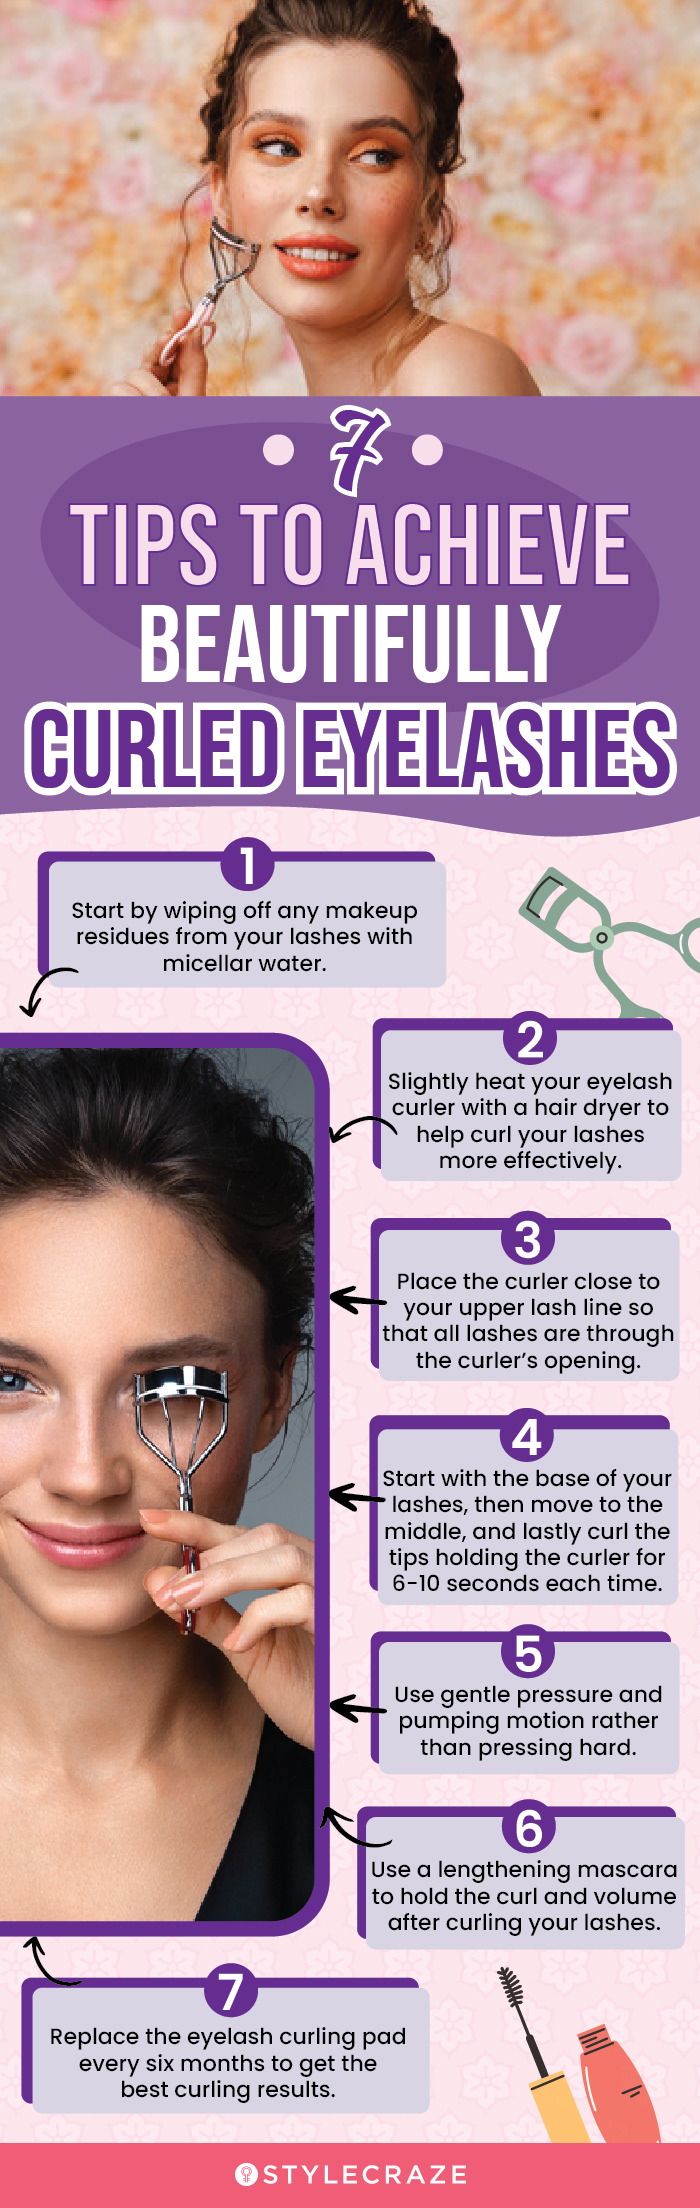 7 Eyelash Curling Tips For Perfectly Curled Lashes (infographic)